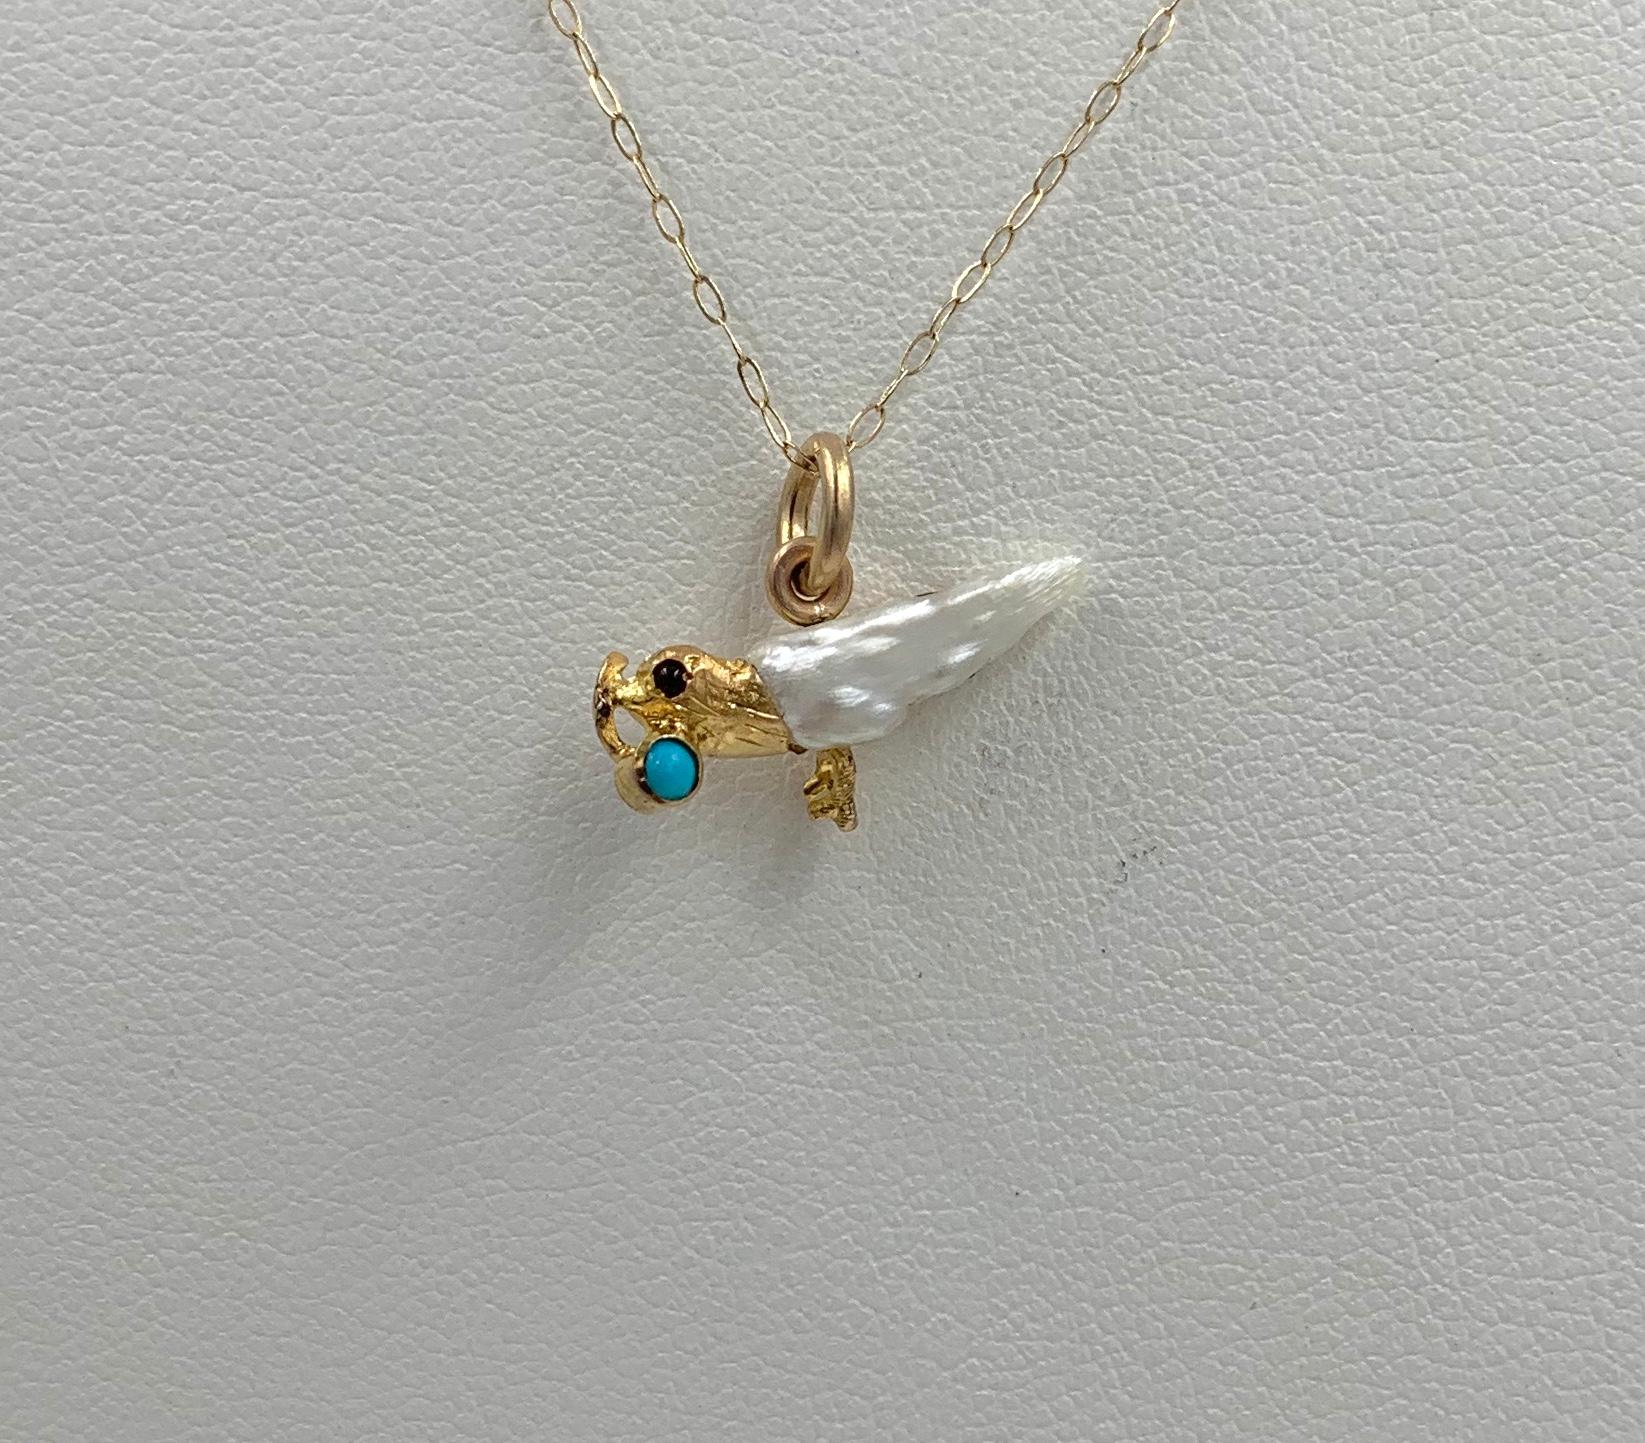 A stunning romantic antique Victorian - Edwardian Pendant or Charm in the form of a flying Bird carrying a Persian Turquoise and set with a Ruby eye and Baroque Pearl Wings.  The pendant has elements of the Victorian as well as the Edwardian